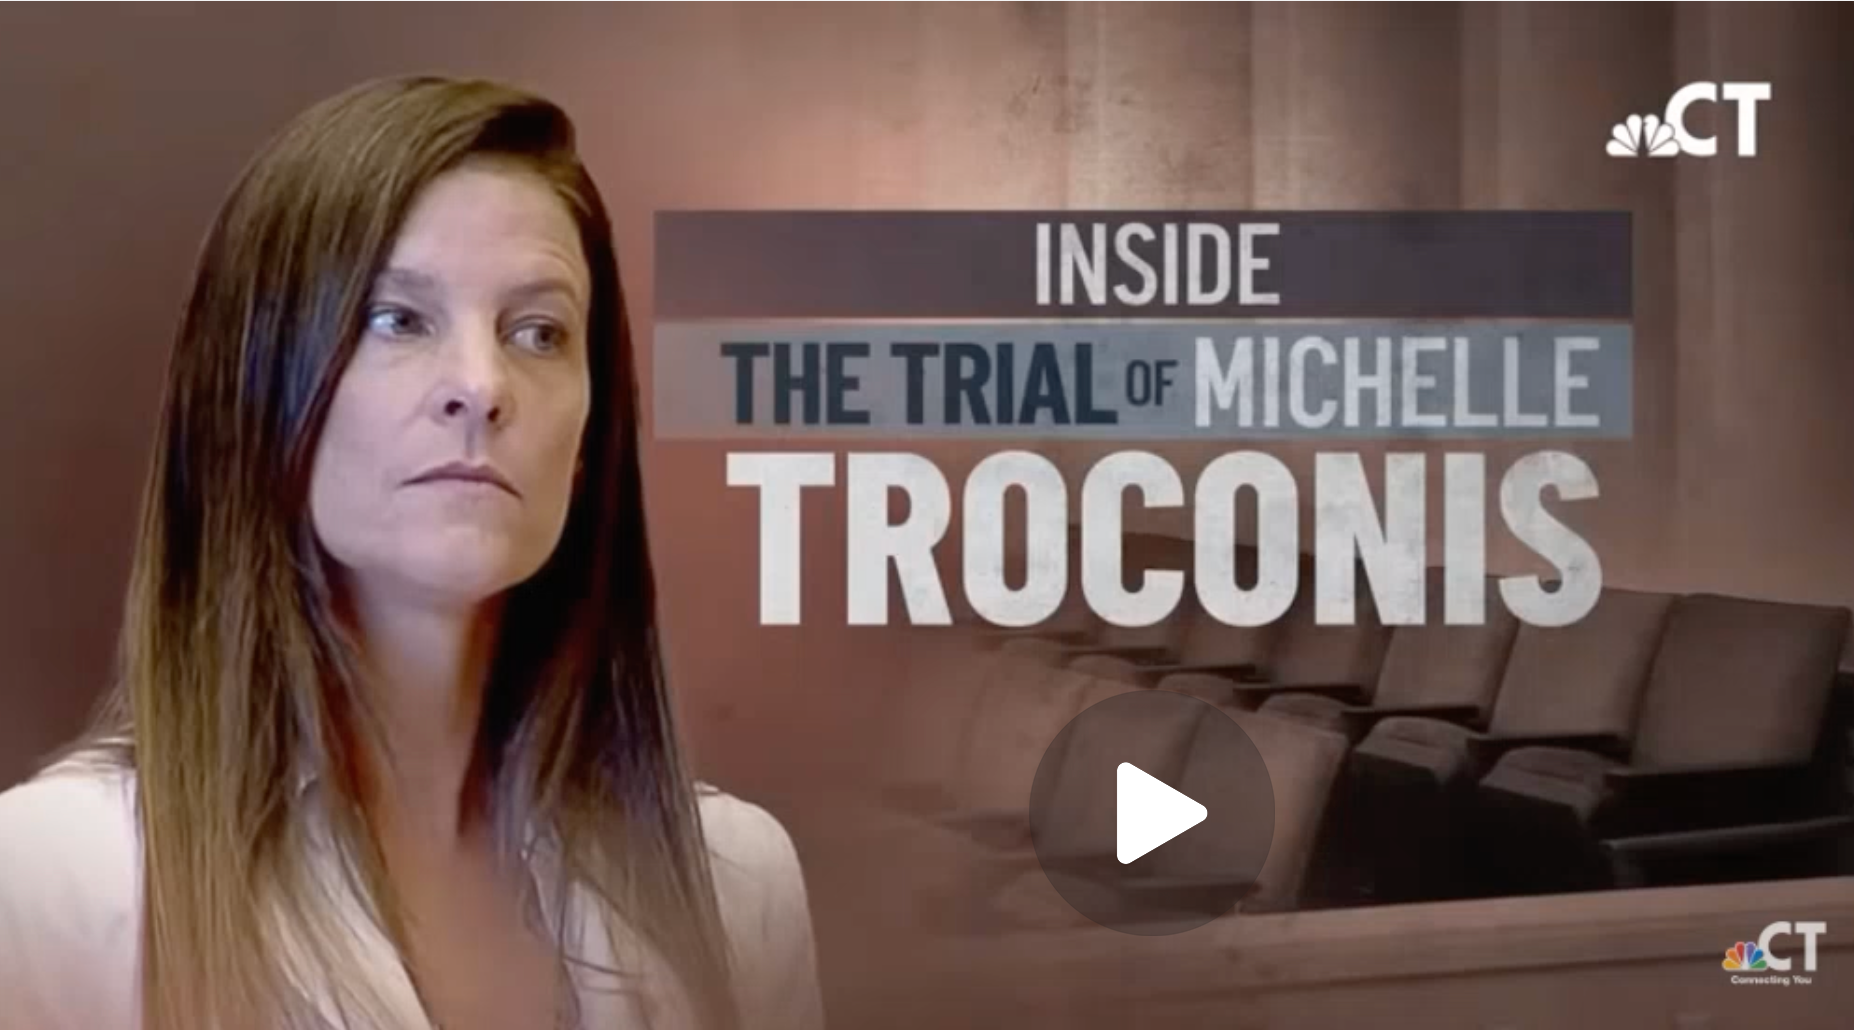 NBC30 image of "Inside the trial of Michelle Troconis" with play button